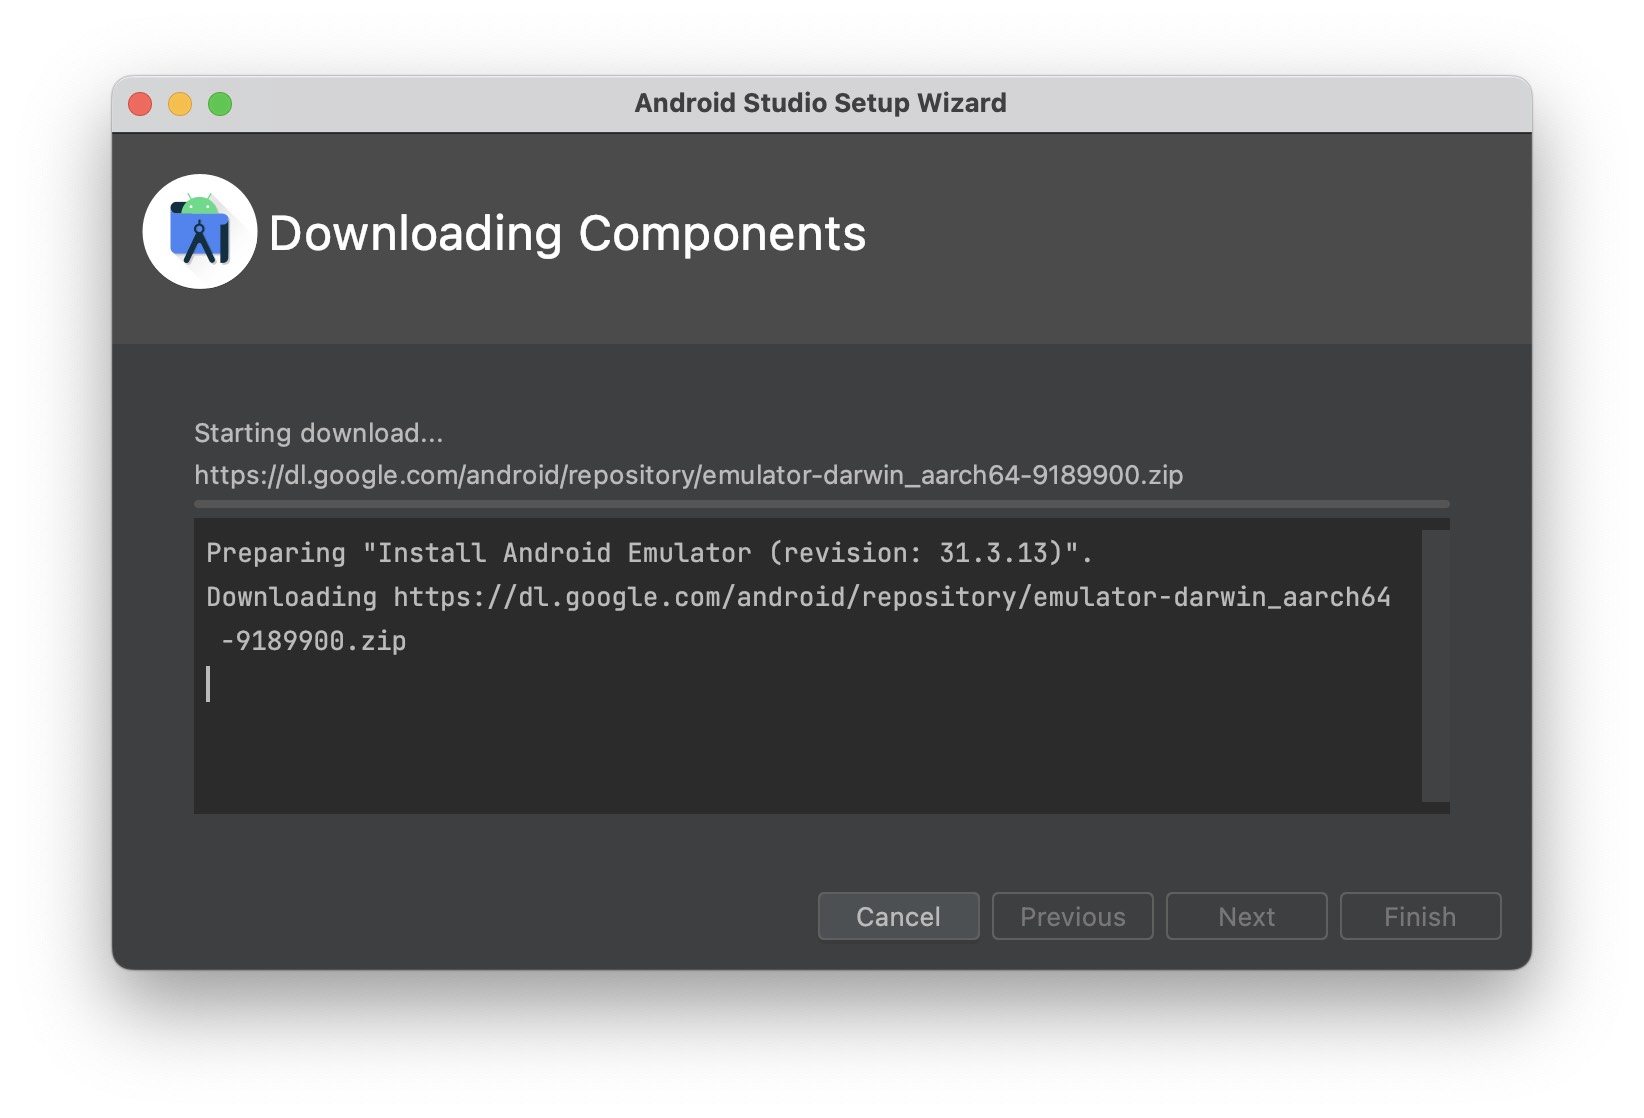 Downloading Android Emulator with Android Studio Setup on Mac